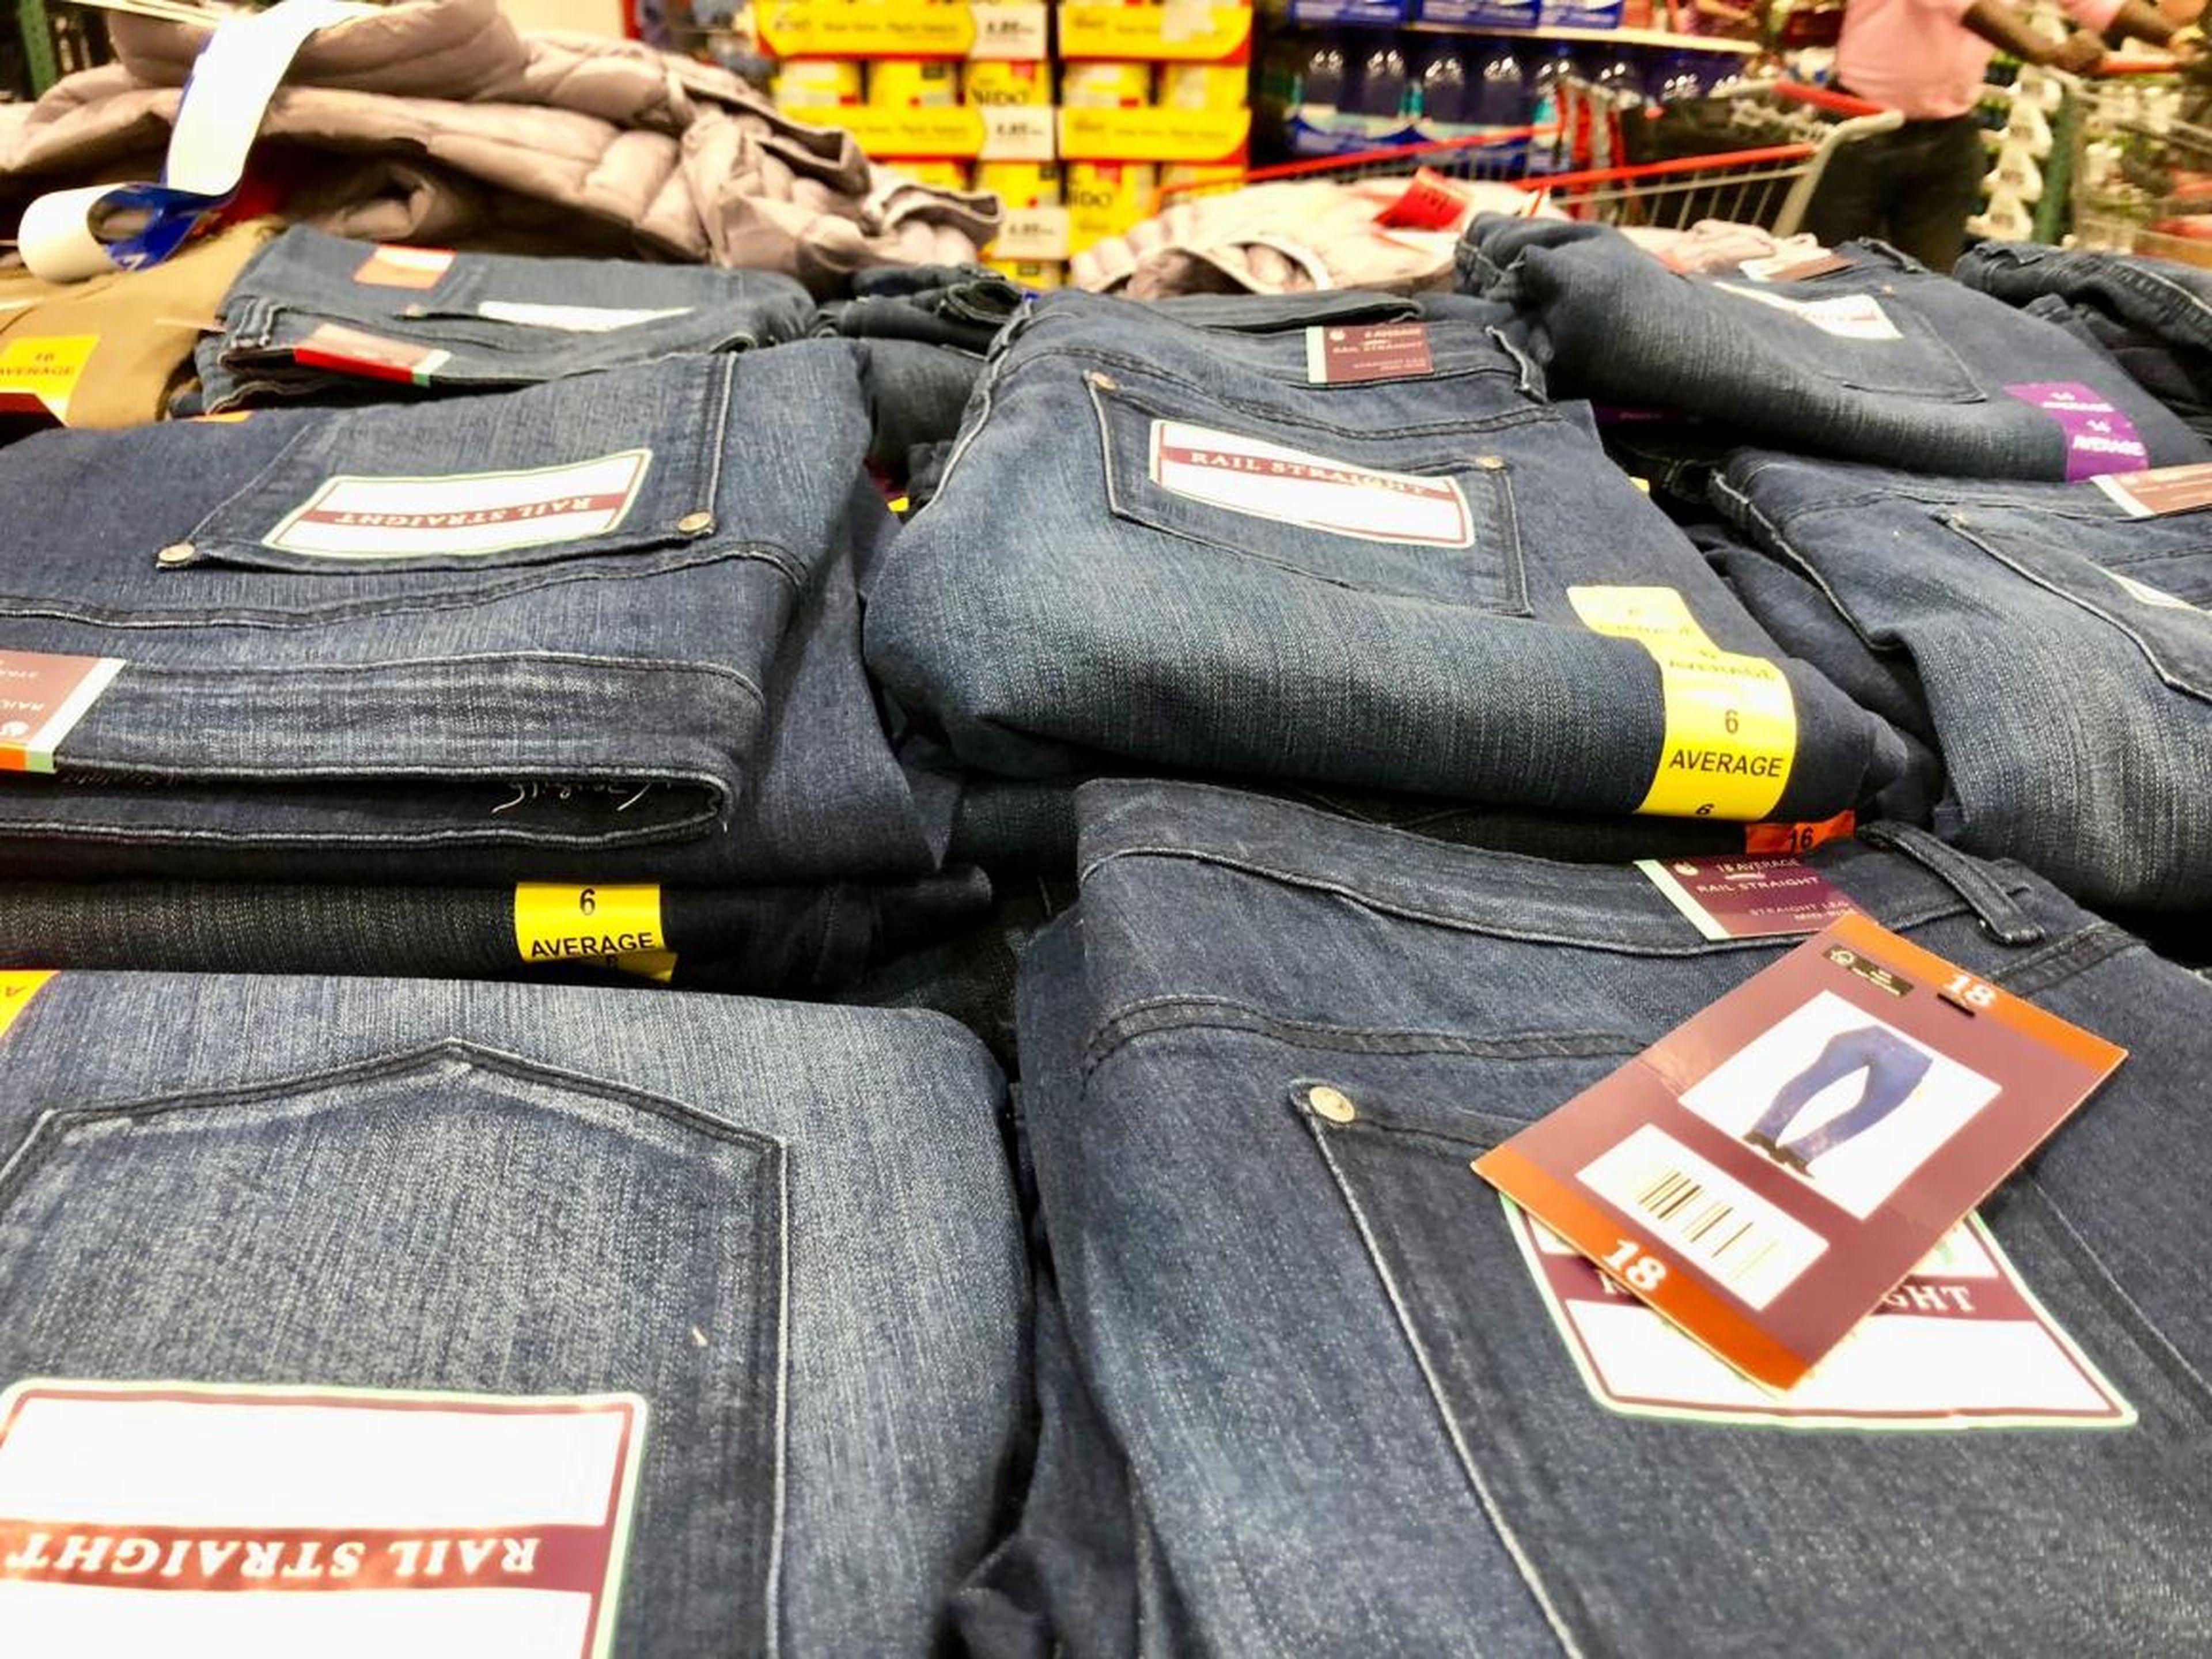 It takes about 2,000 gallons of water to produce a pair of jeans. That's more than enough for one person to drink eight cups per day for 10 years.